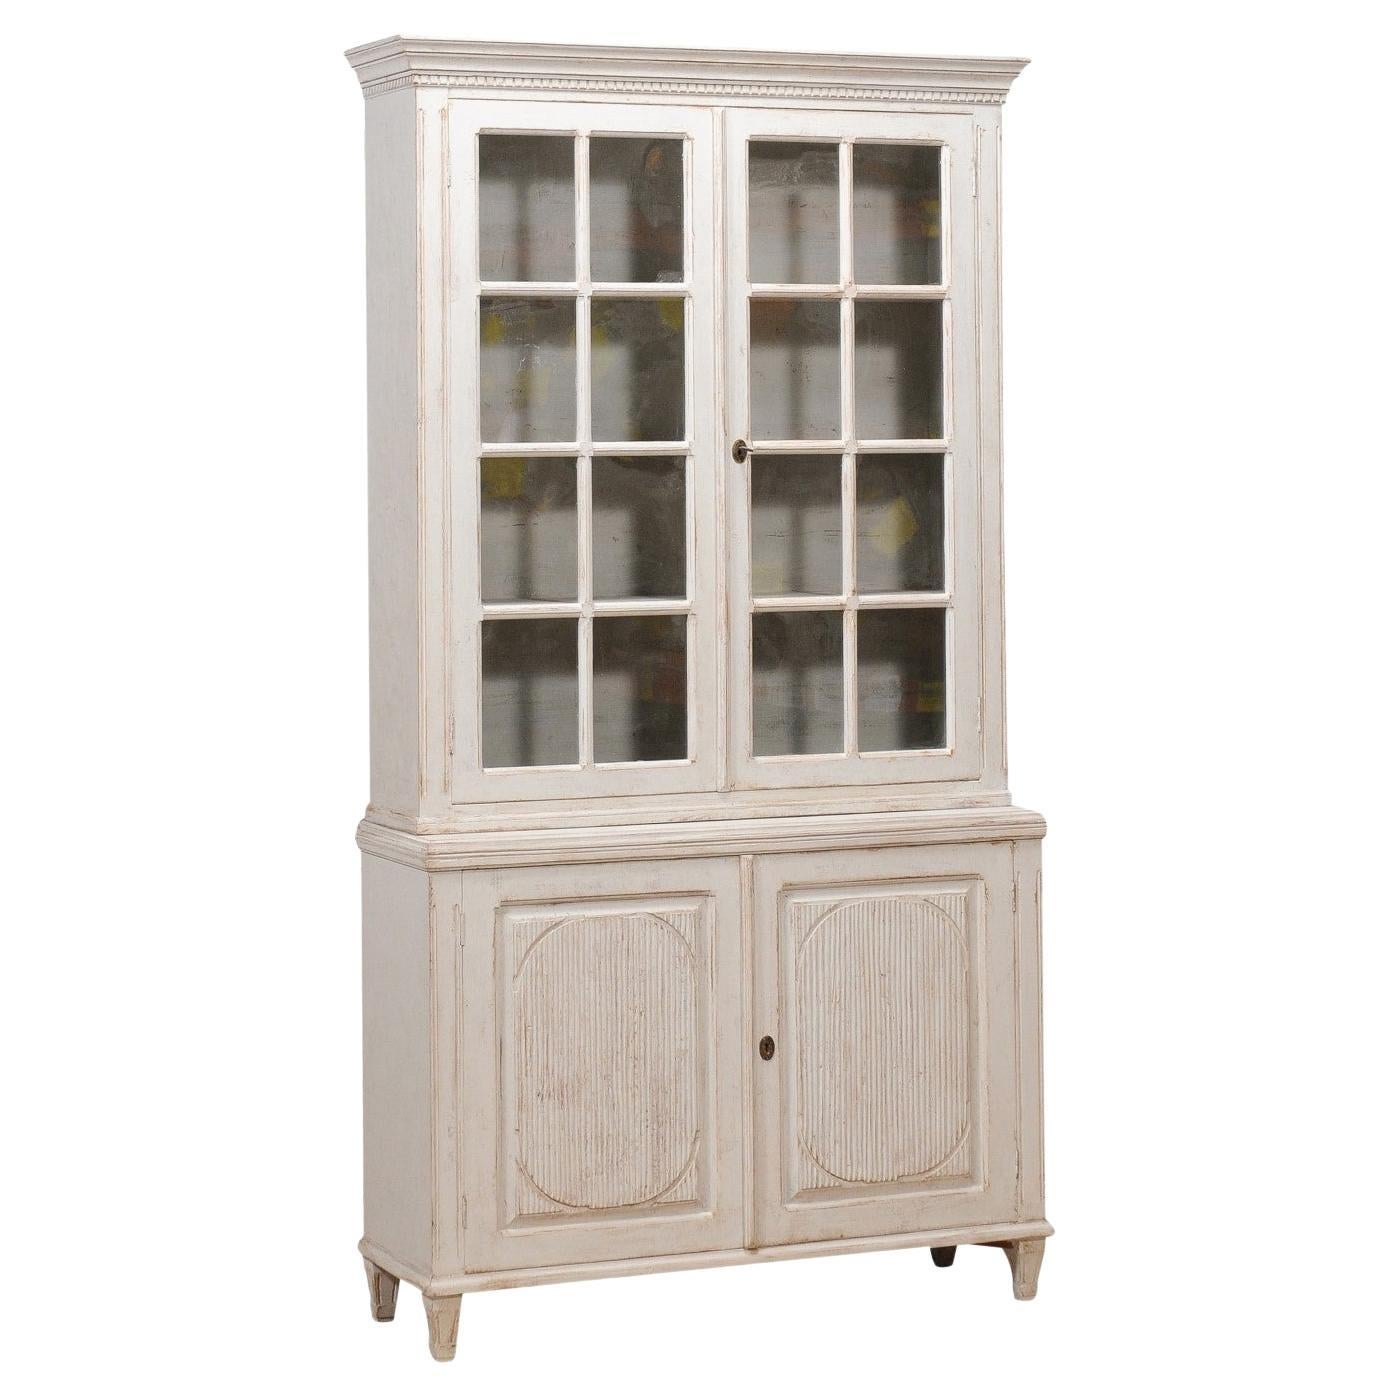 Swedish Gustavian Style 19th Century Painted Vitrine with Glass Doors For Sale